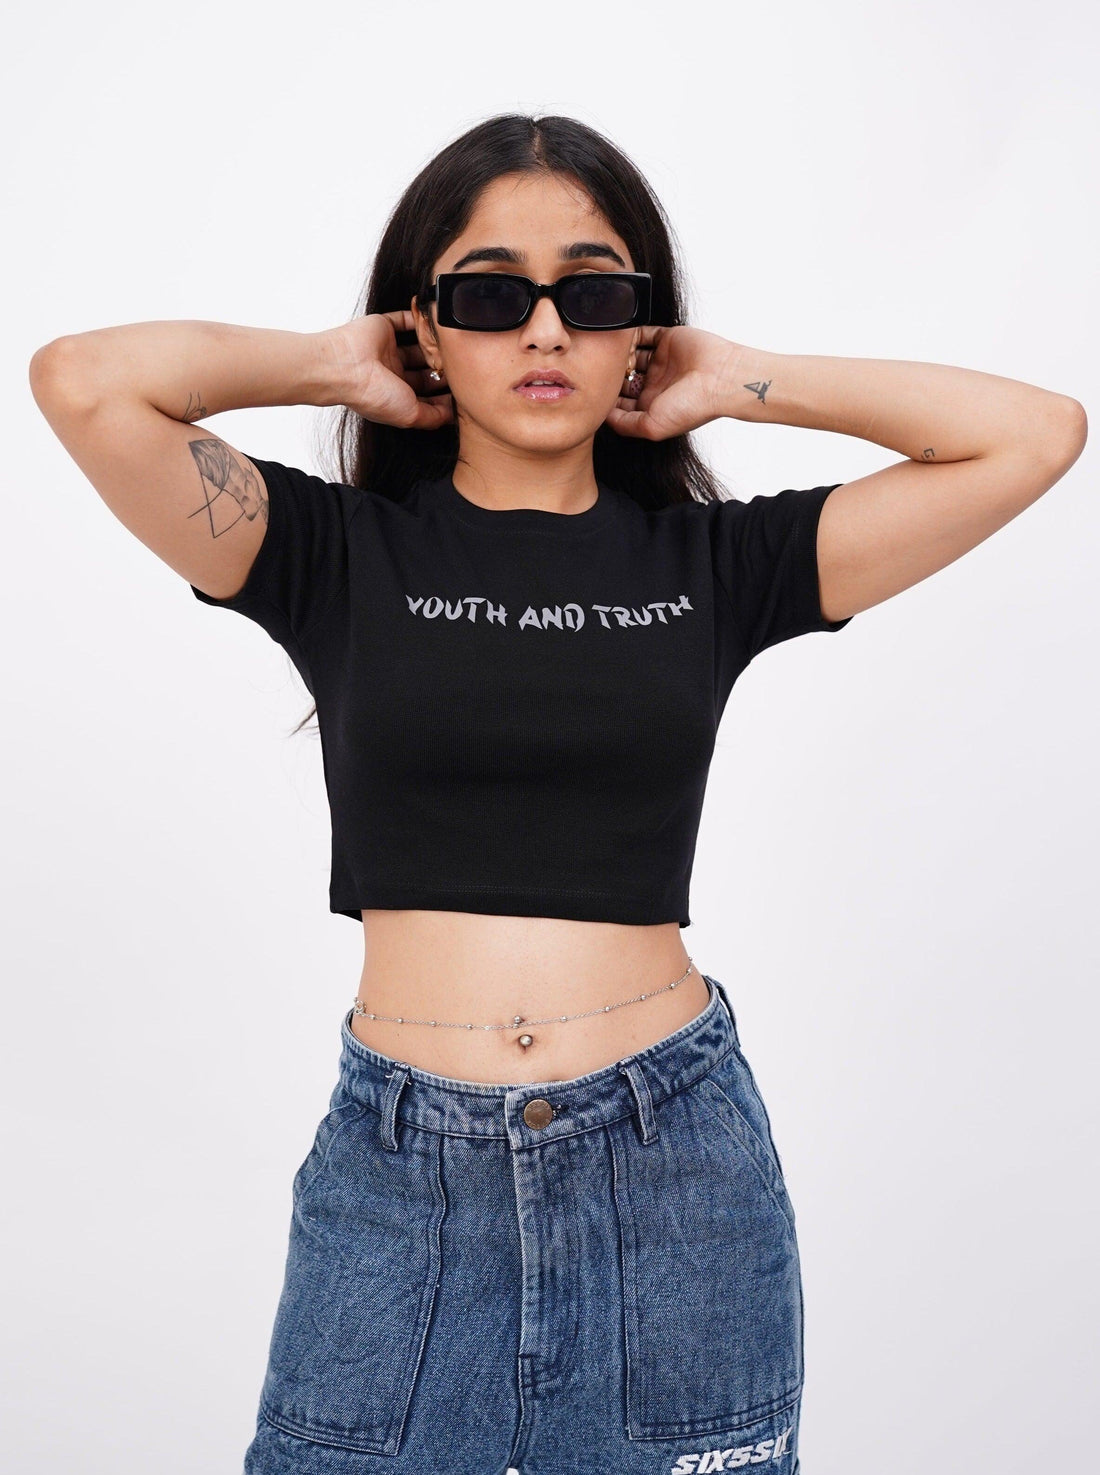 Youth And Truth Baby Tee (T-shirt) Tops Burger Bae 